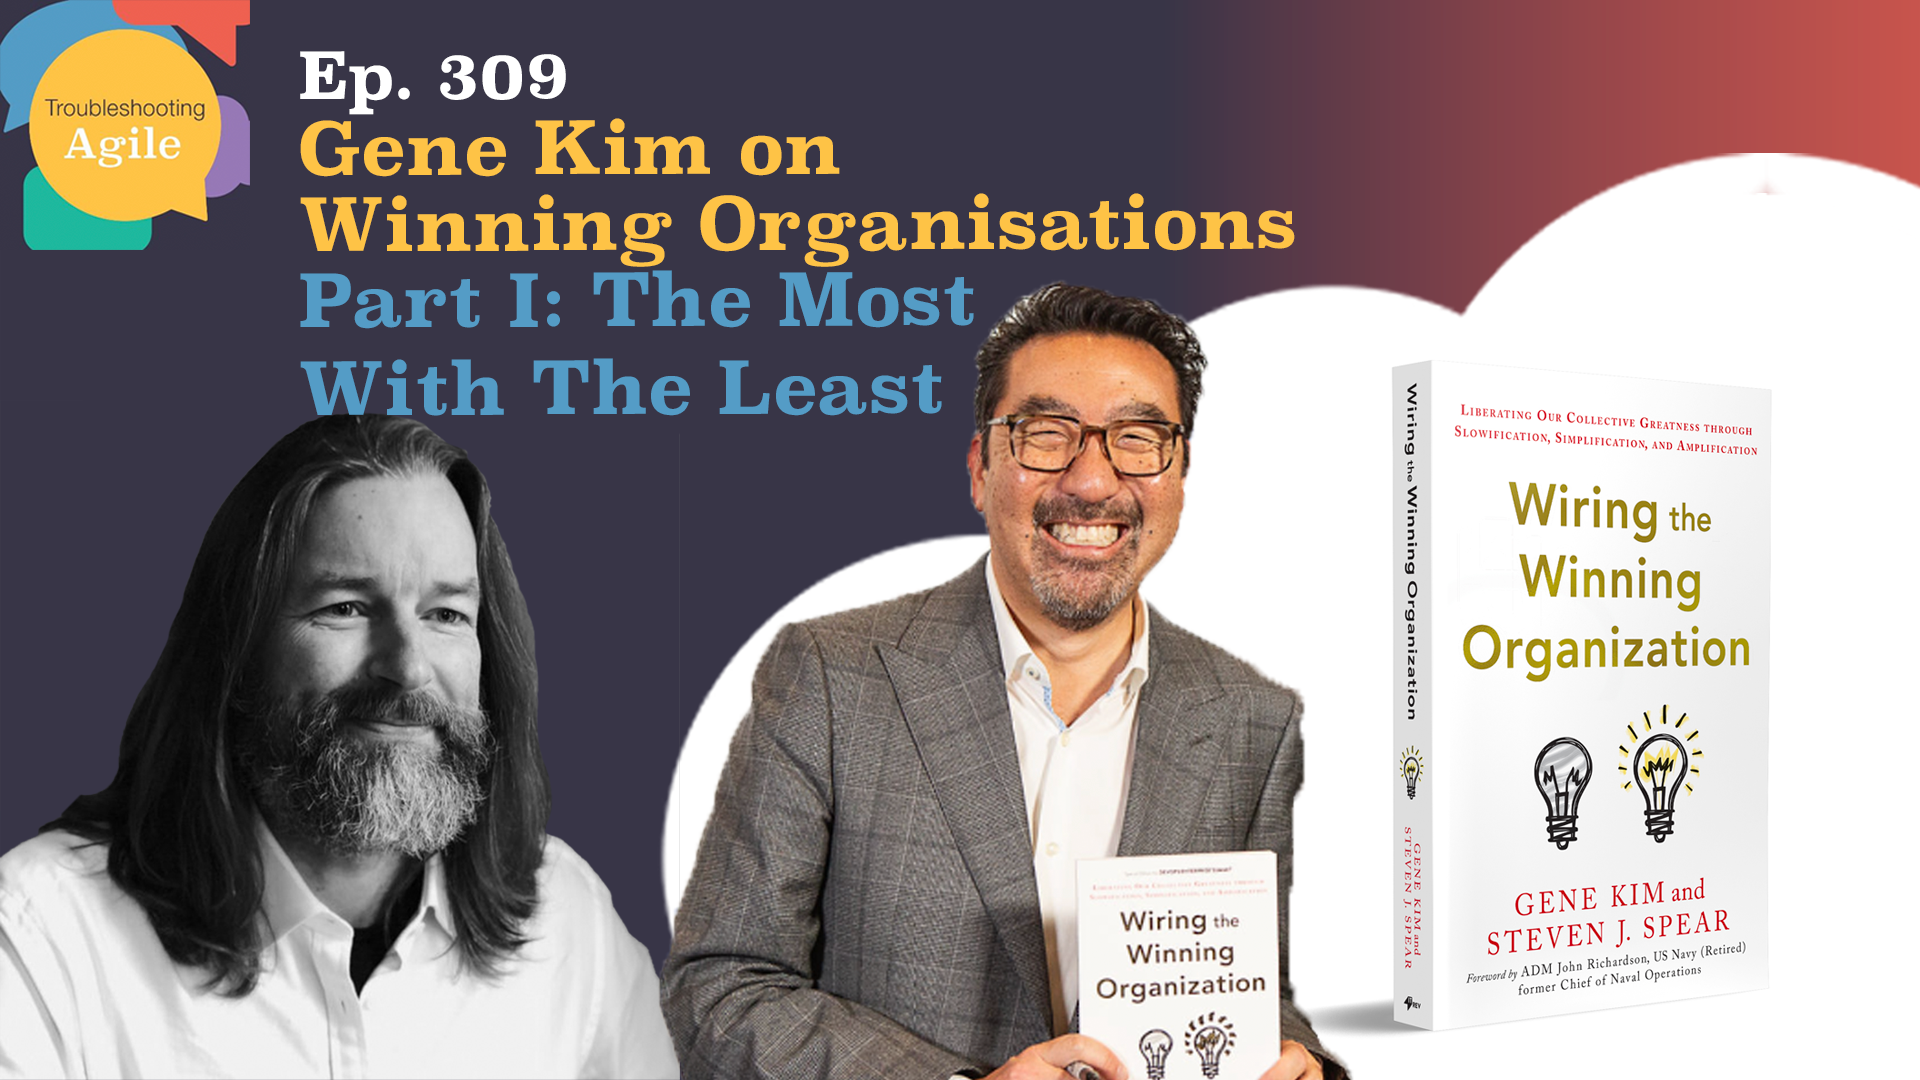 Gene Kim on Winning Organisations Part 1 - The Most With The Least